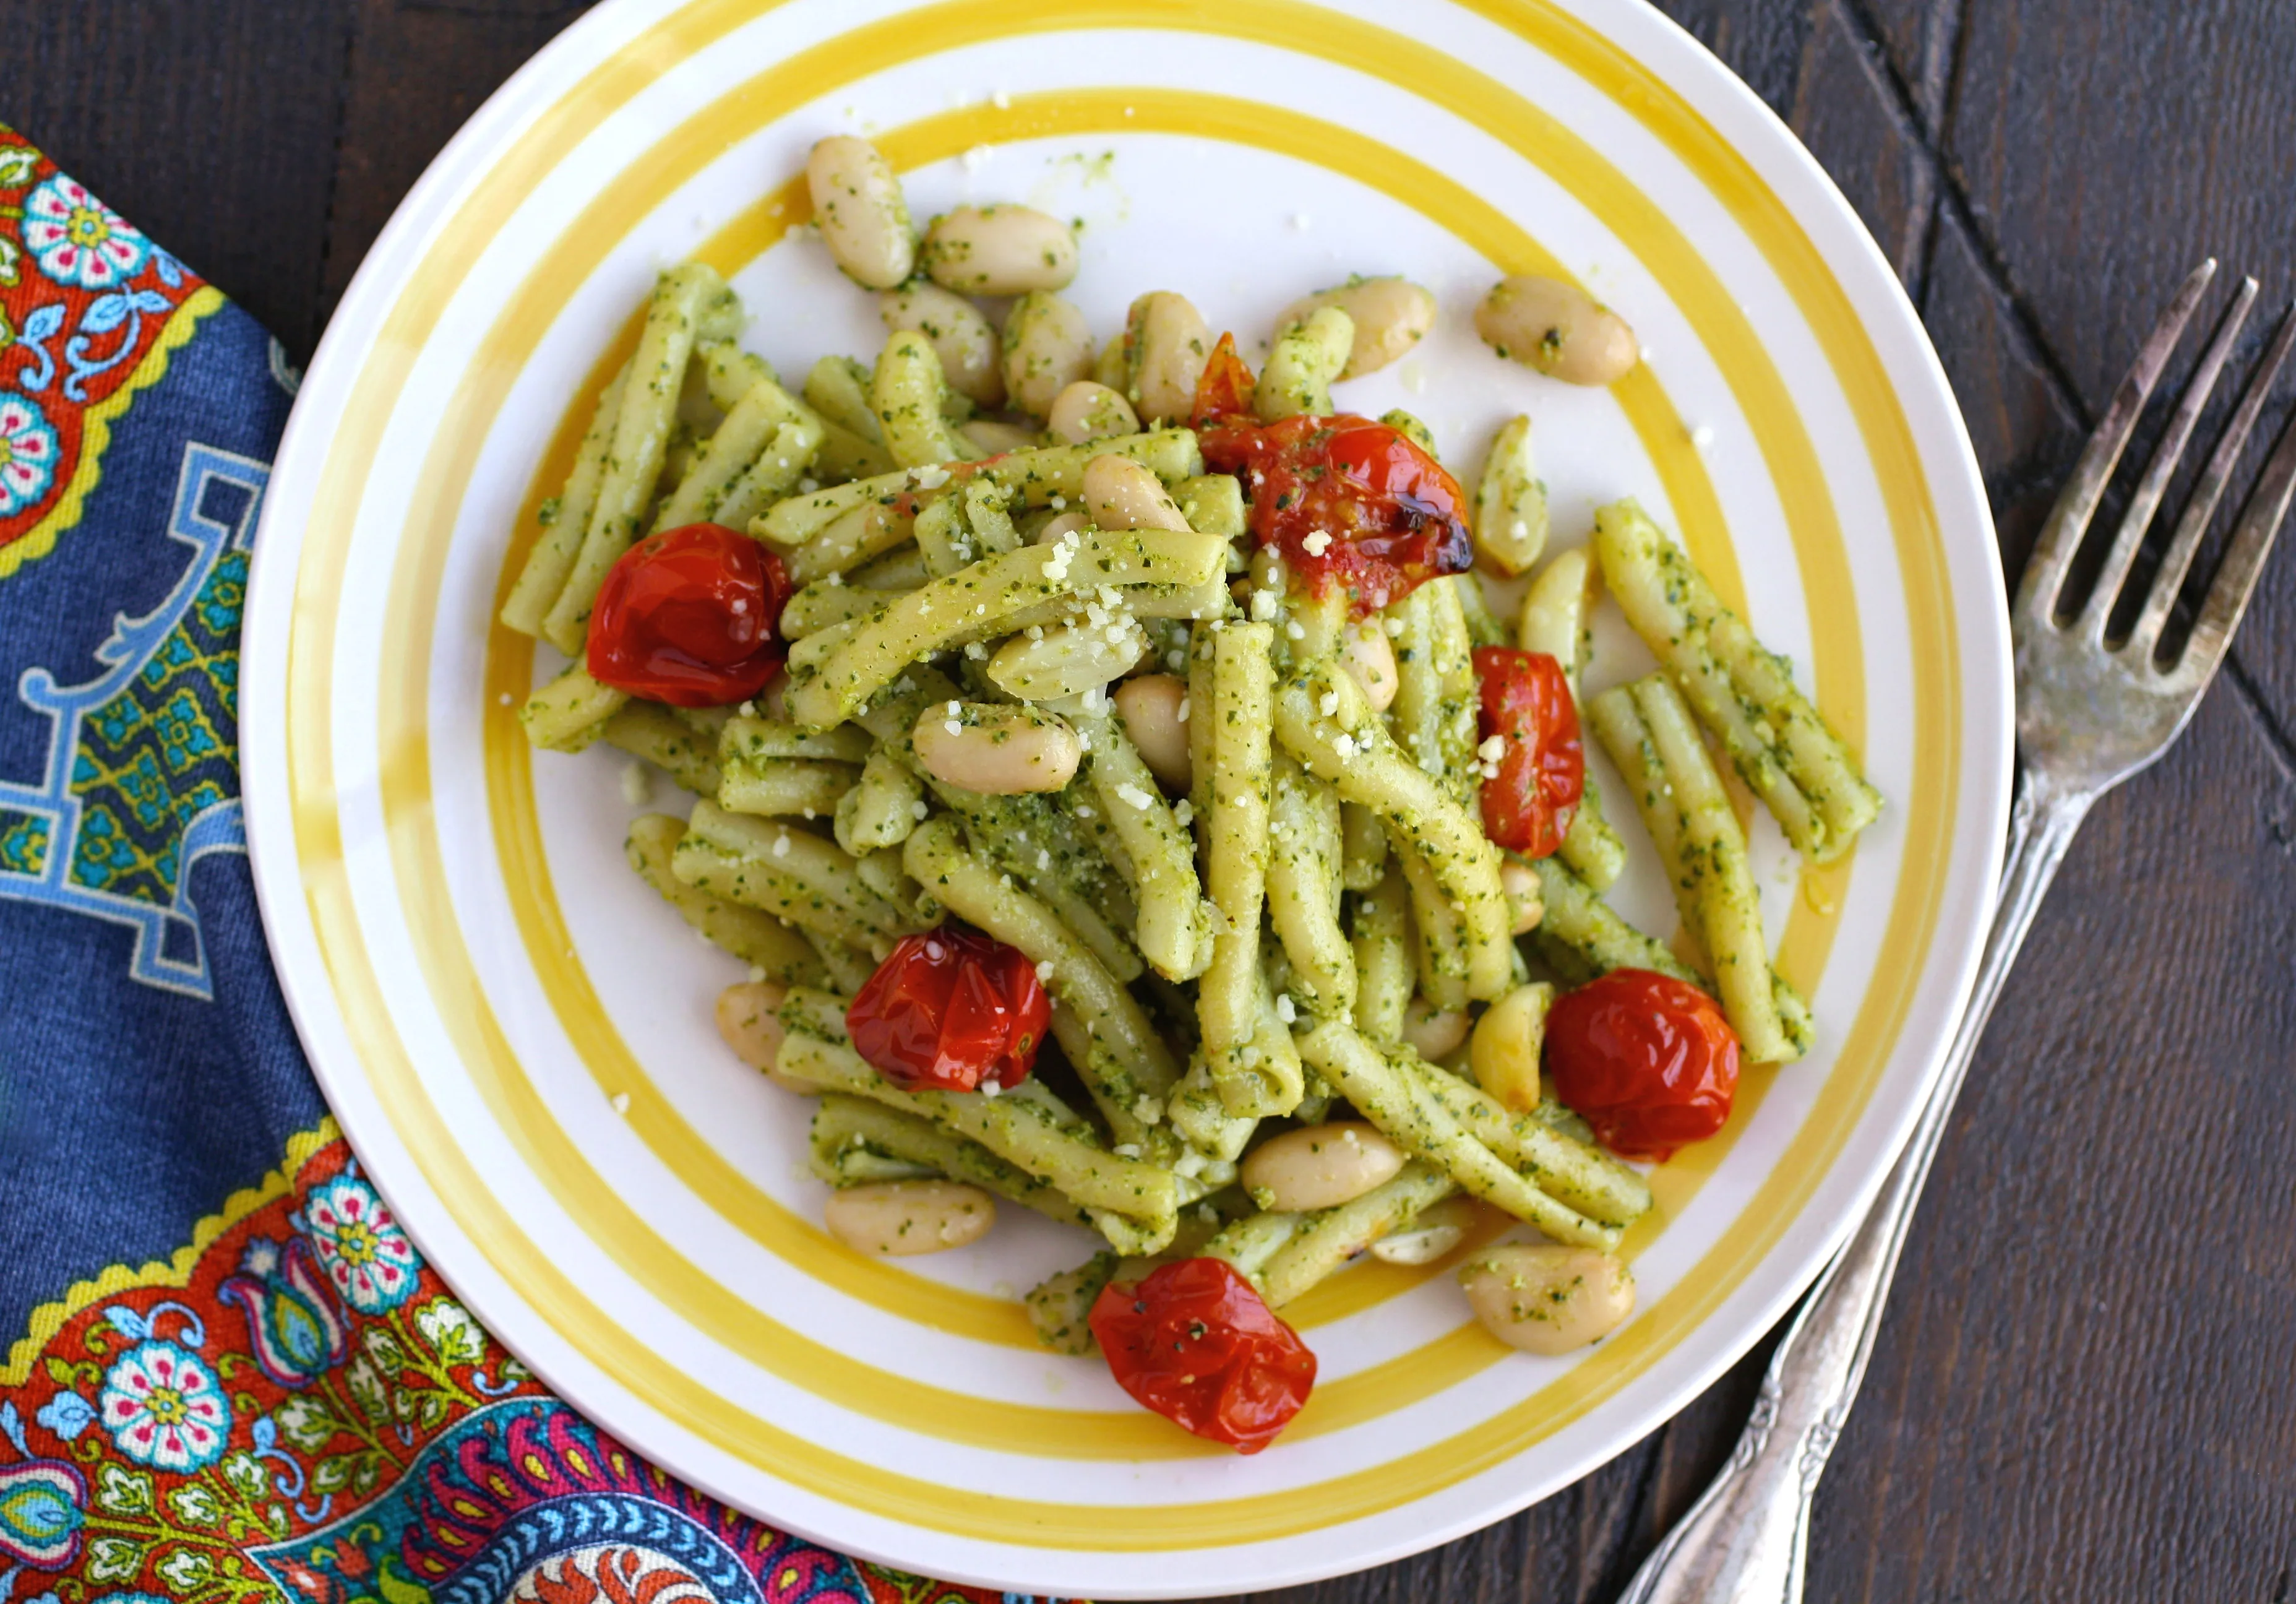 dig in to Kale Pesto Pasta with Roasted Tomatoes and White Beans for a flavorful meal!